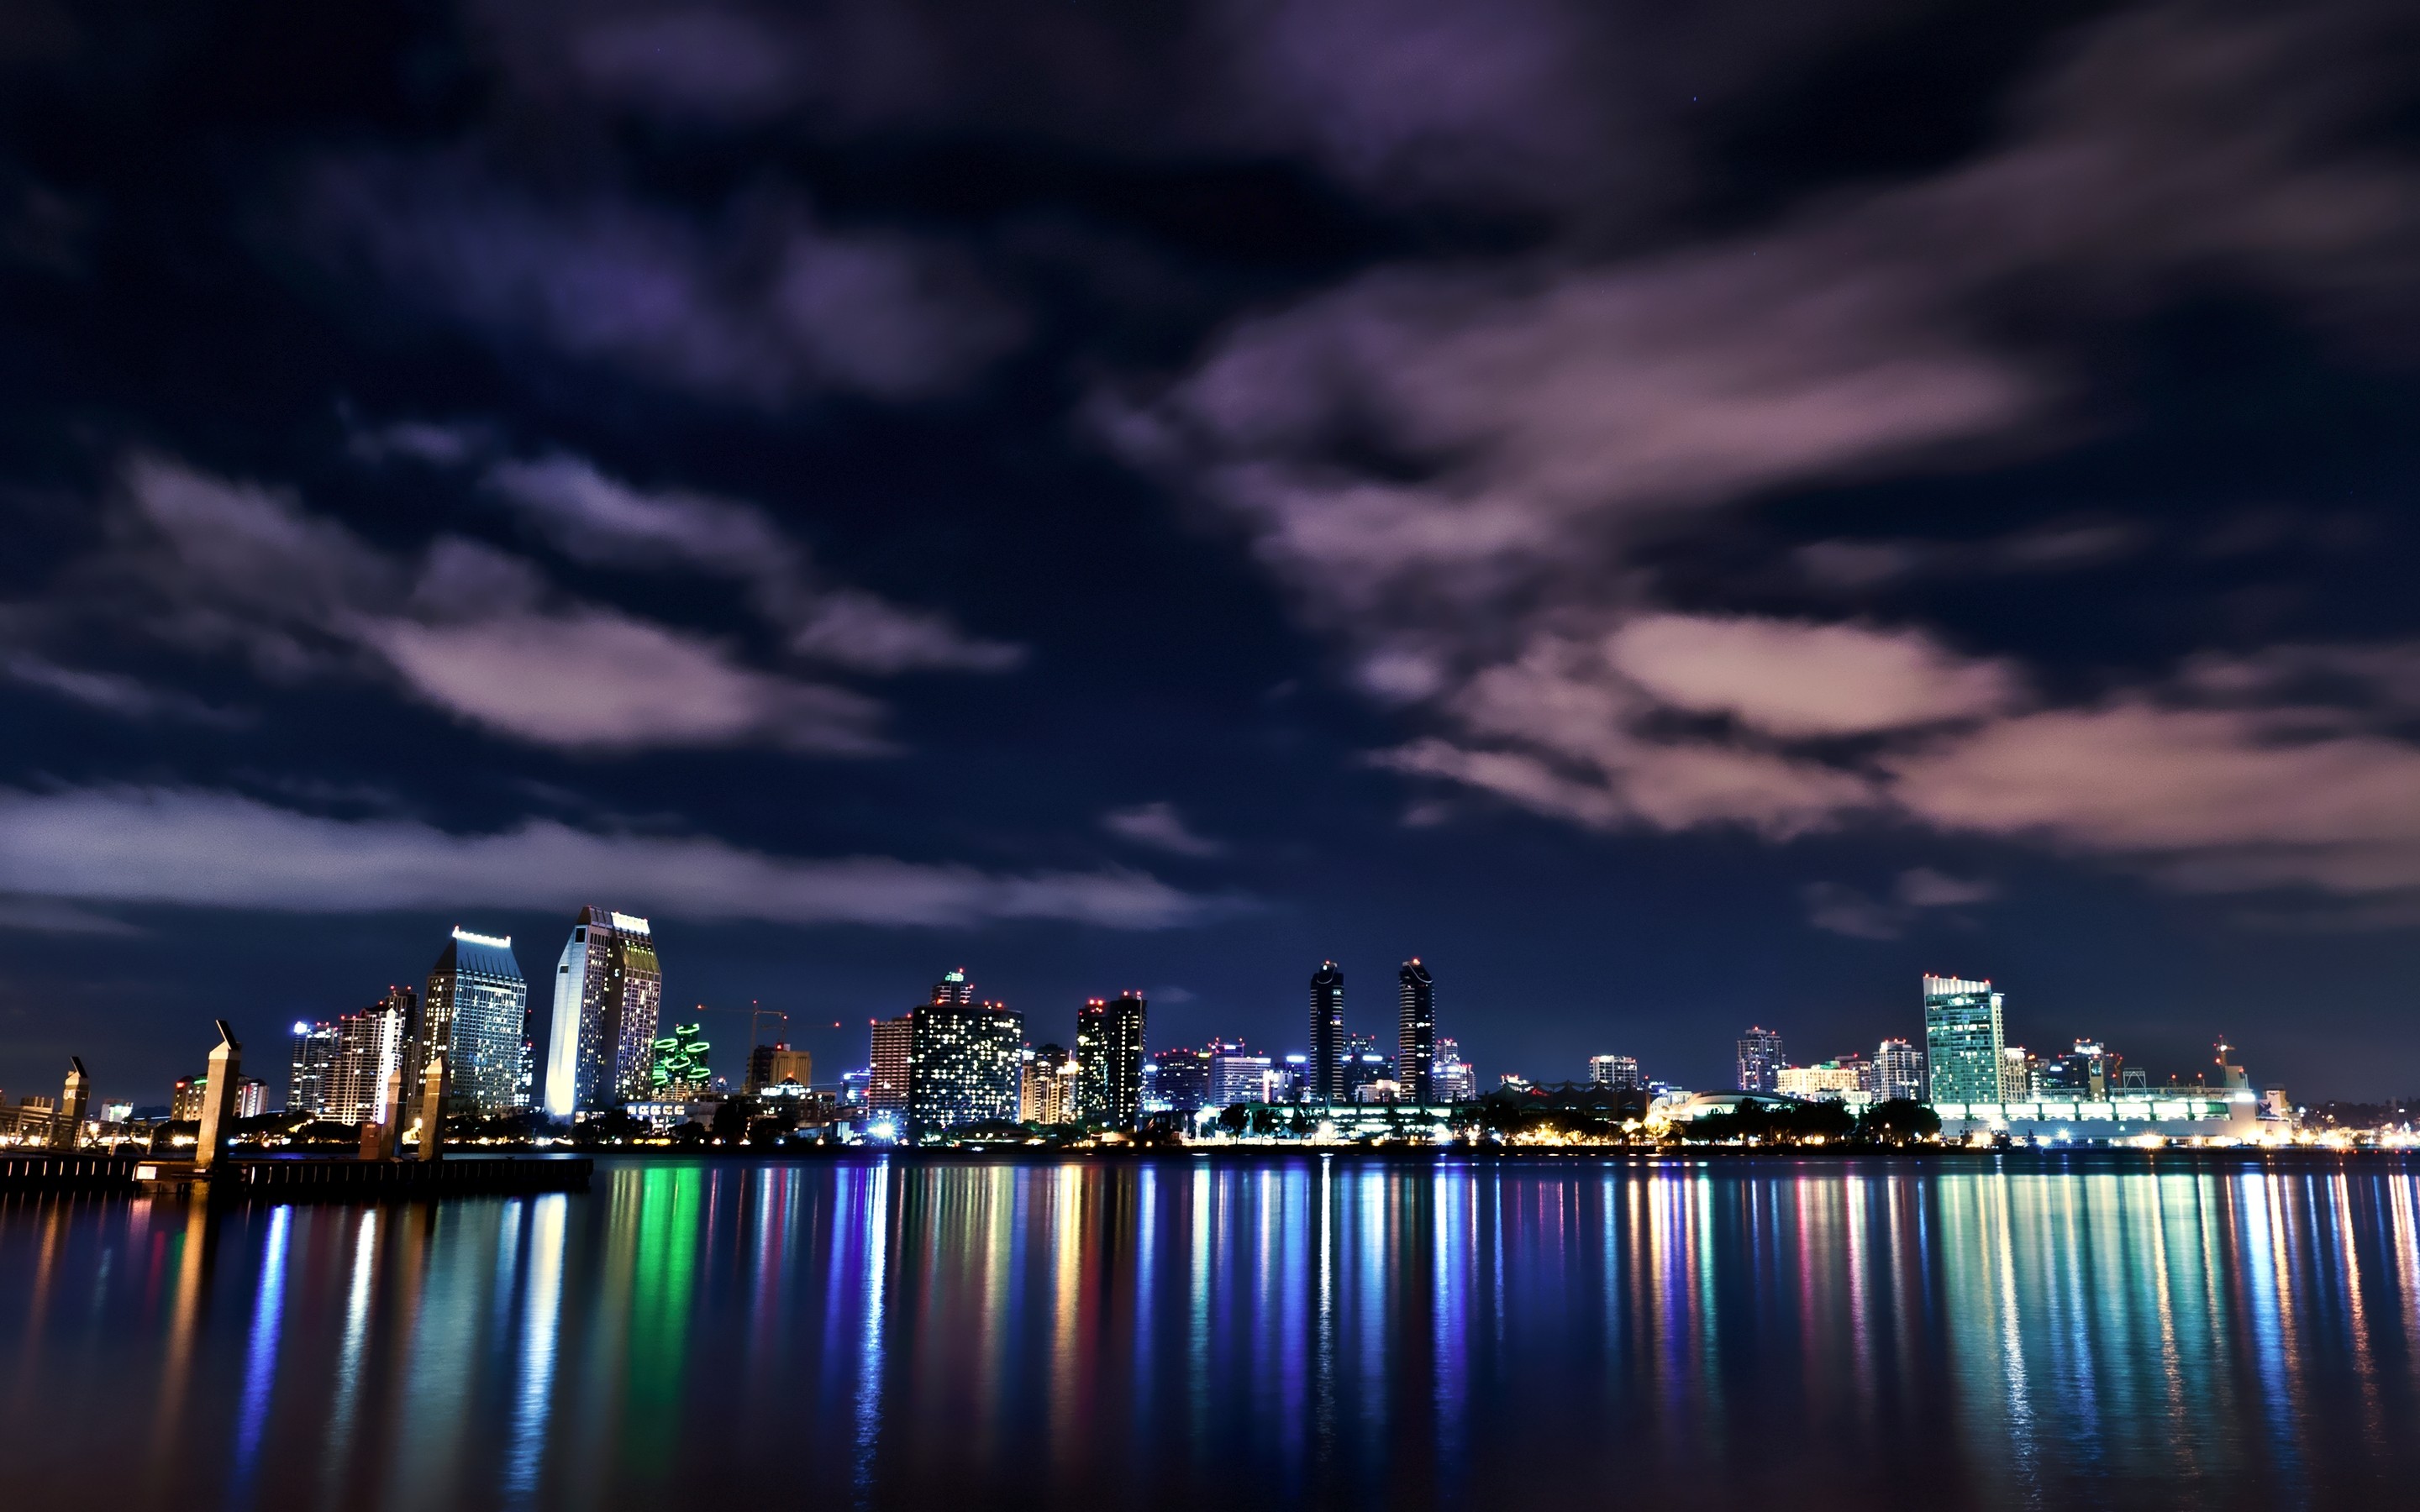 water, clouds, cityscapes, night, lights, skyscapes - desktop wallpaper